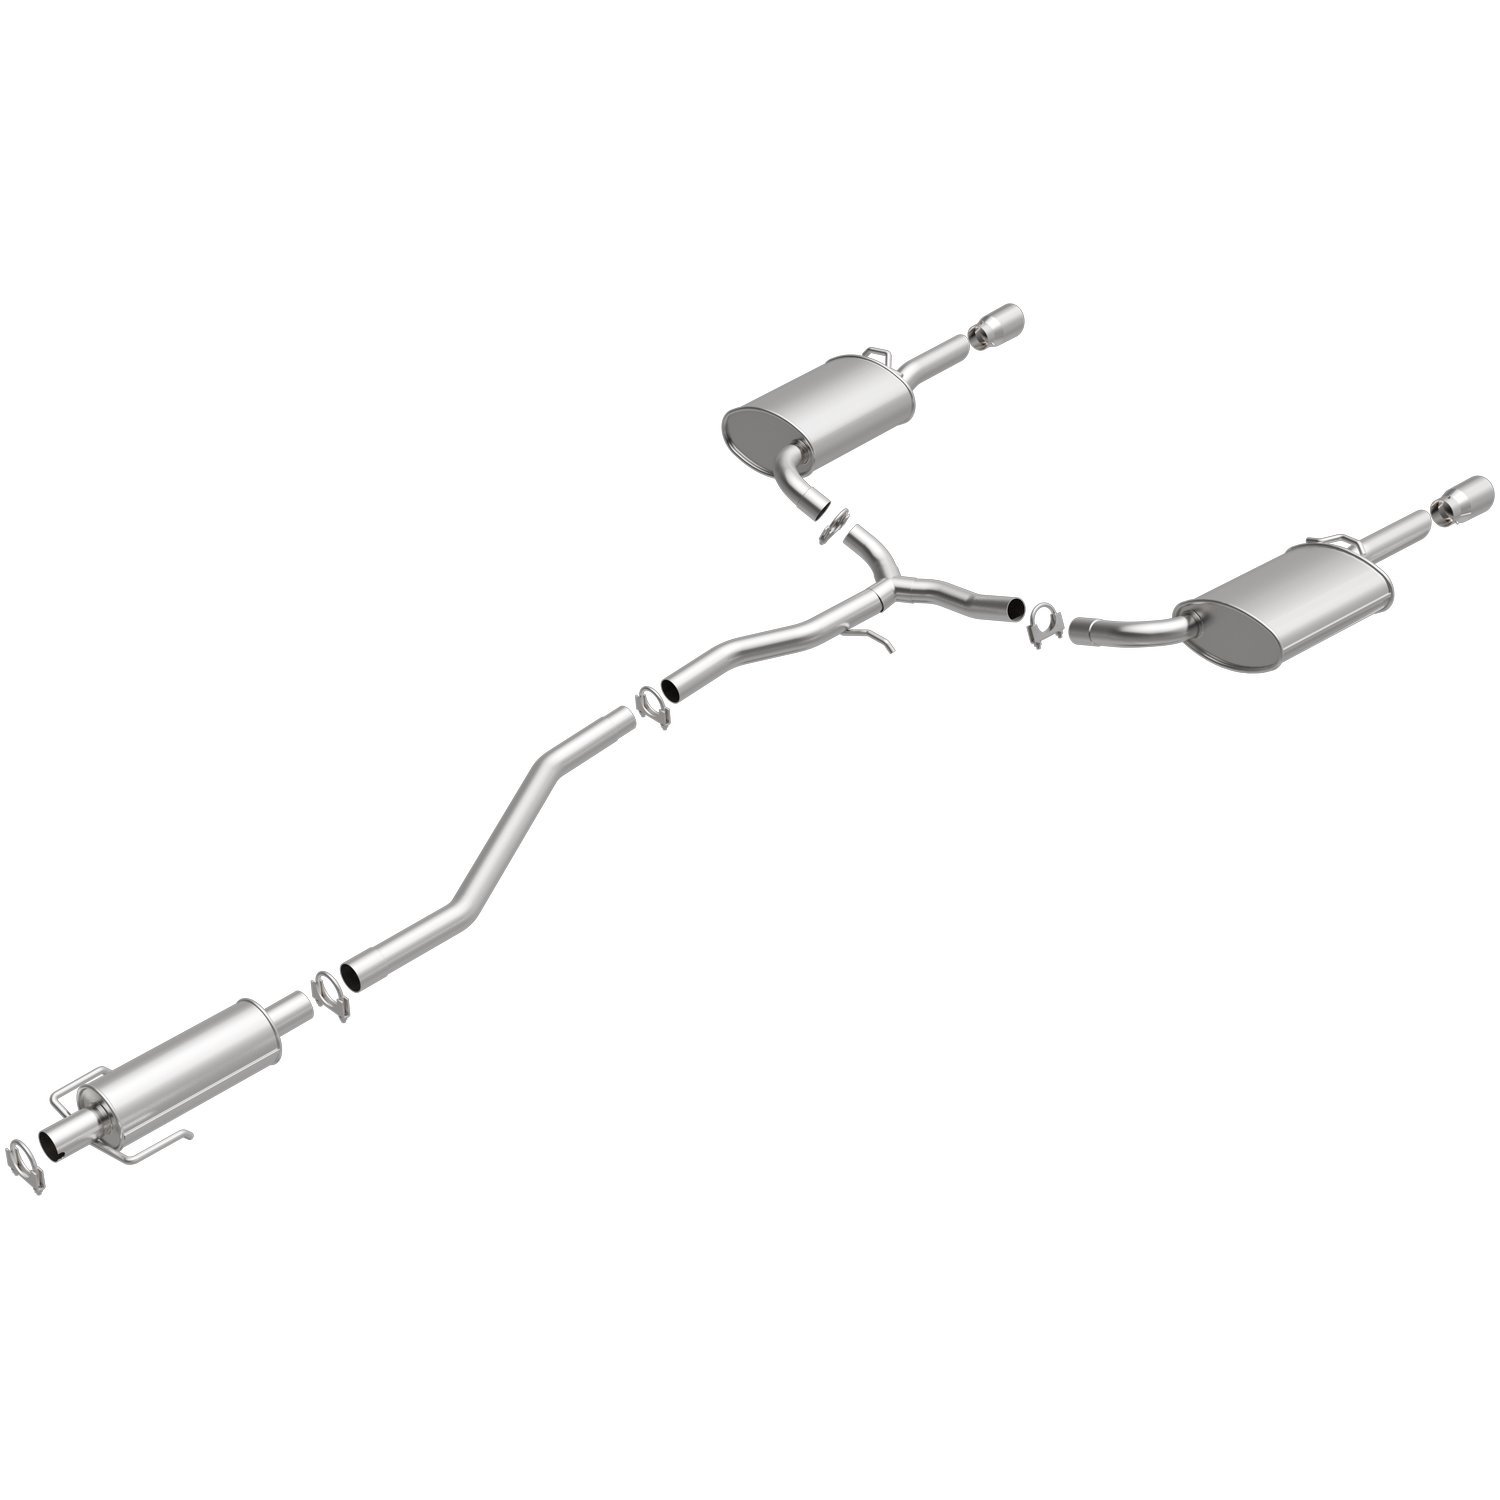 Direct-Fit Exhaust Kit, 2006-2012 Ford Fusion, Mecury Milan